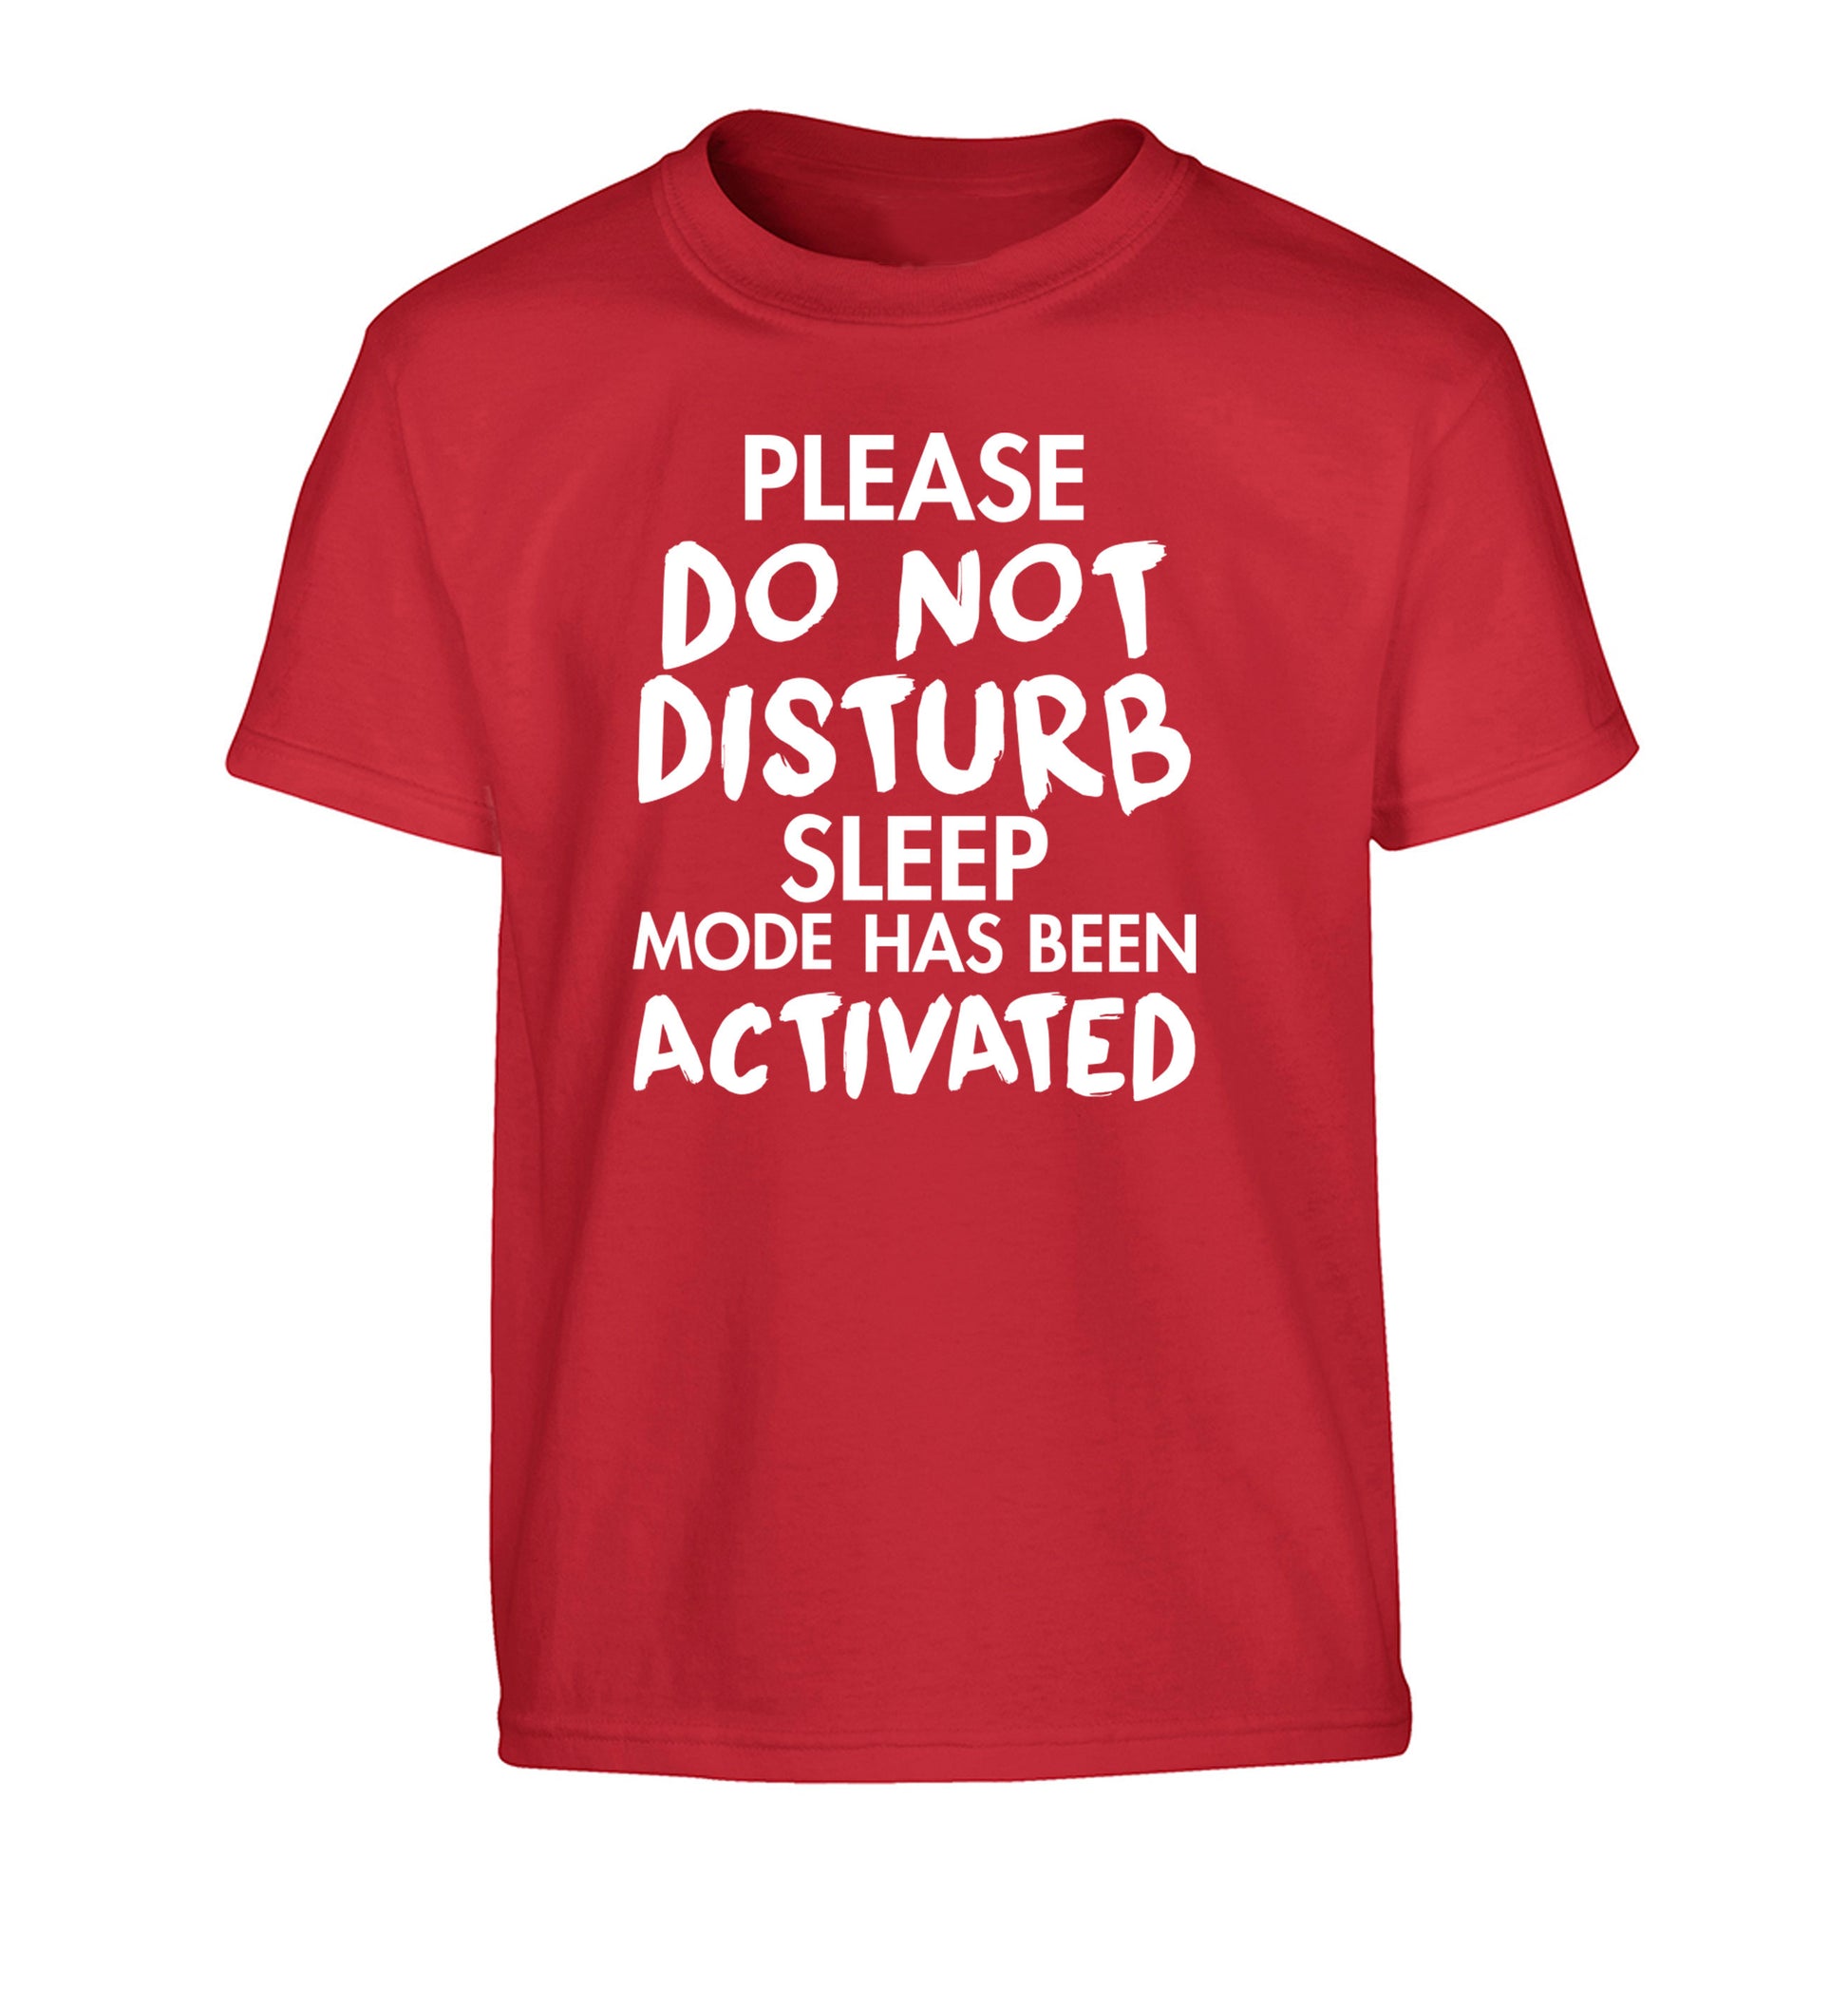 Please do not disturb sleeping mode has been activated Children's red Tshirt 12-14 Years